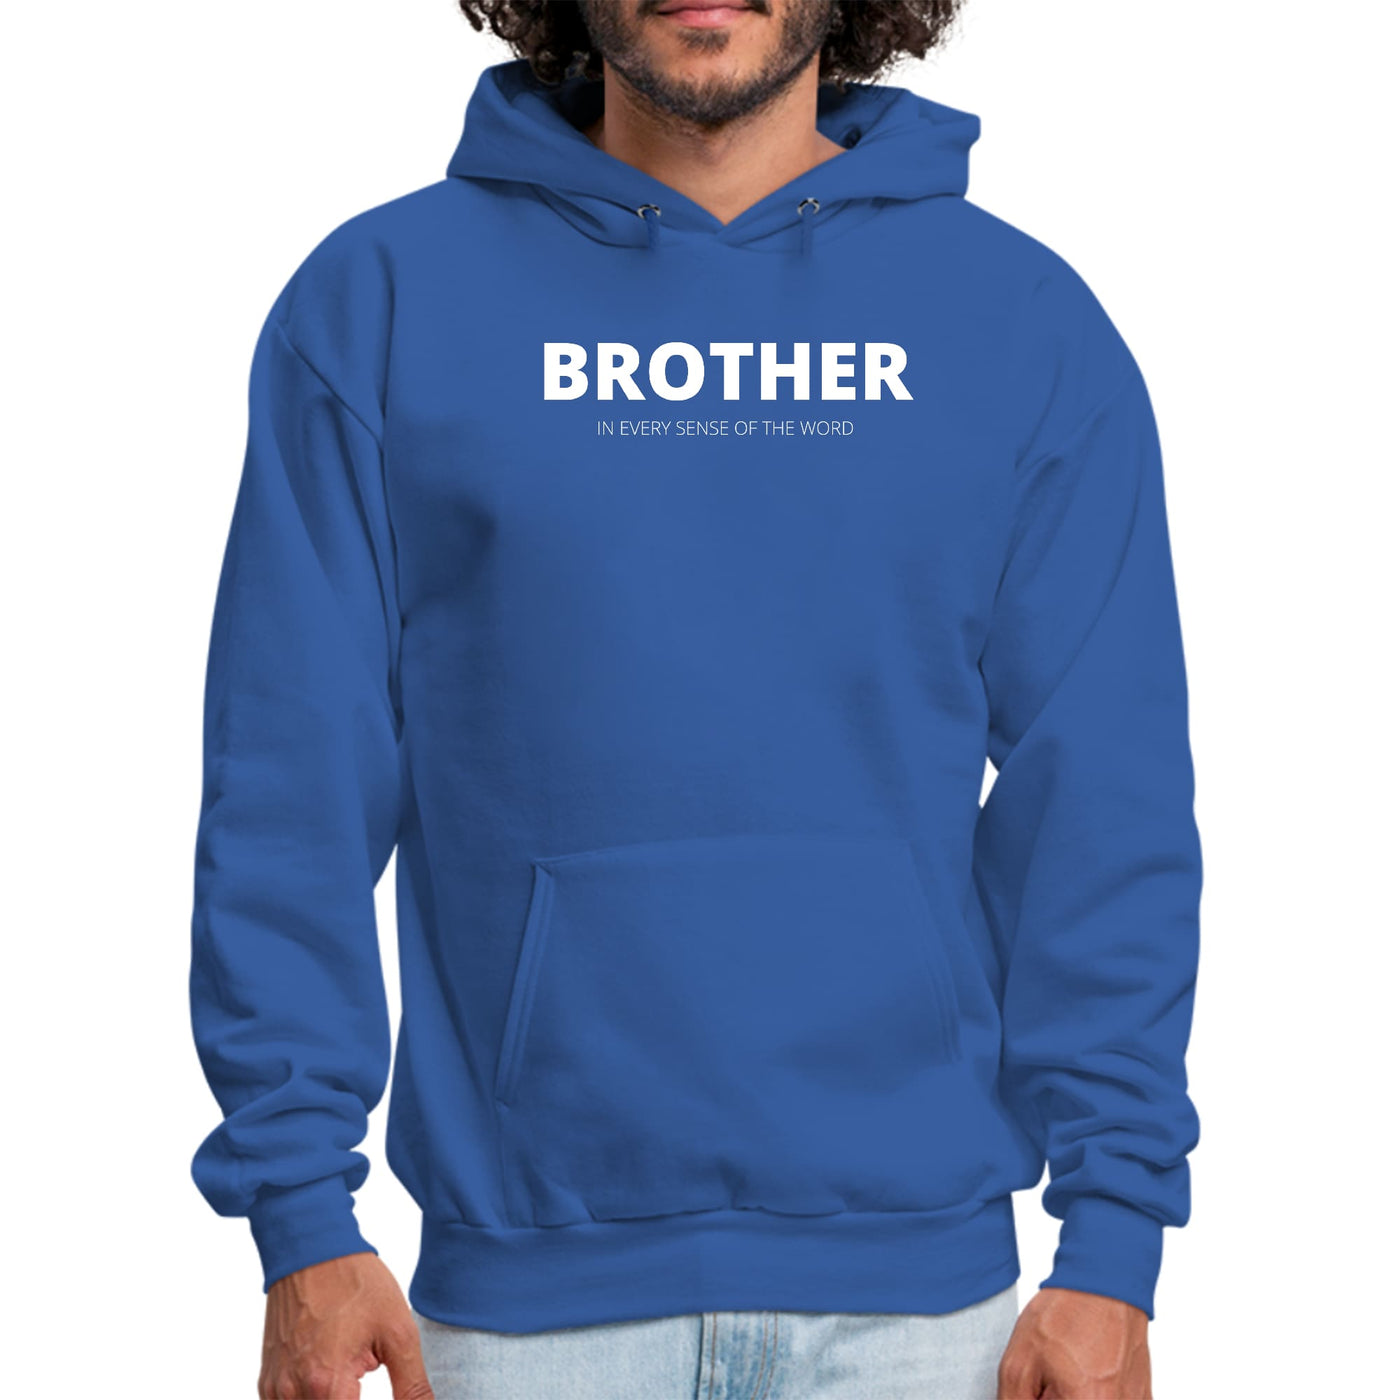 Graphic Hoodie Say It Soul Brother (in Every Sense Of The Word) - Unisex